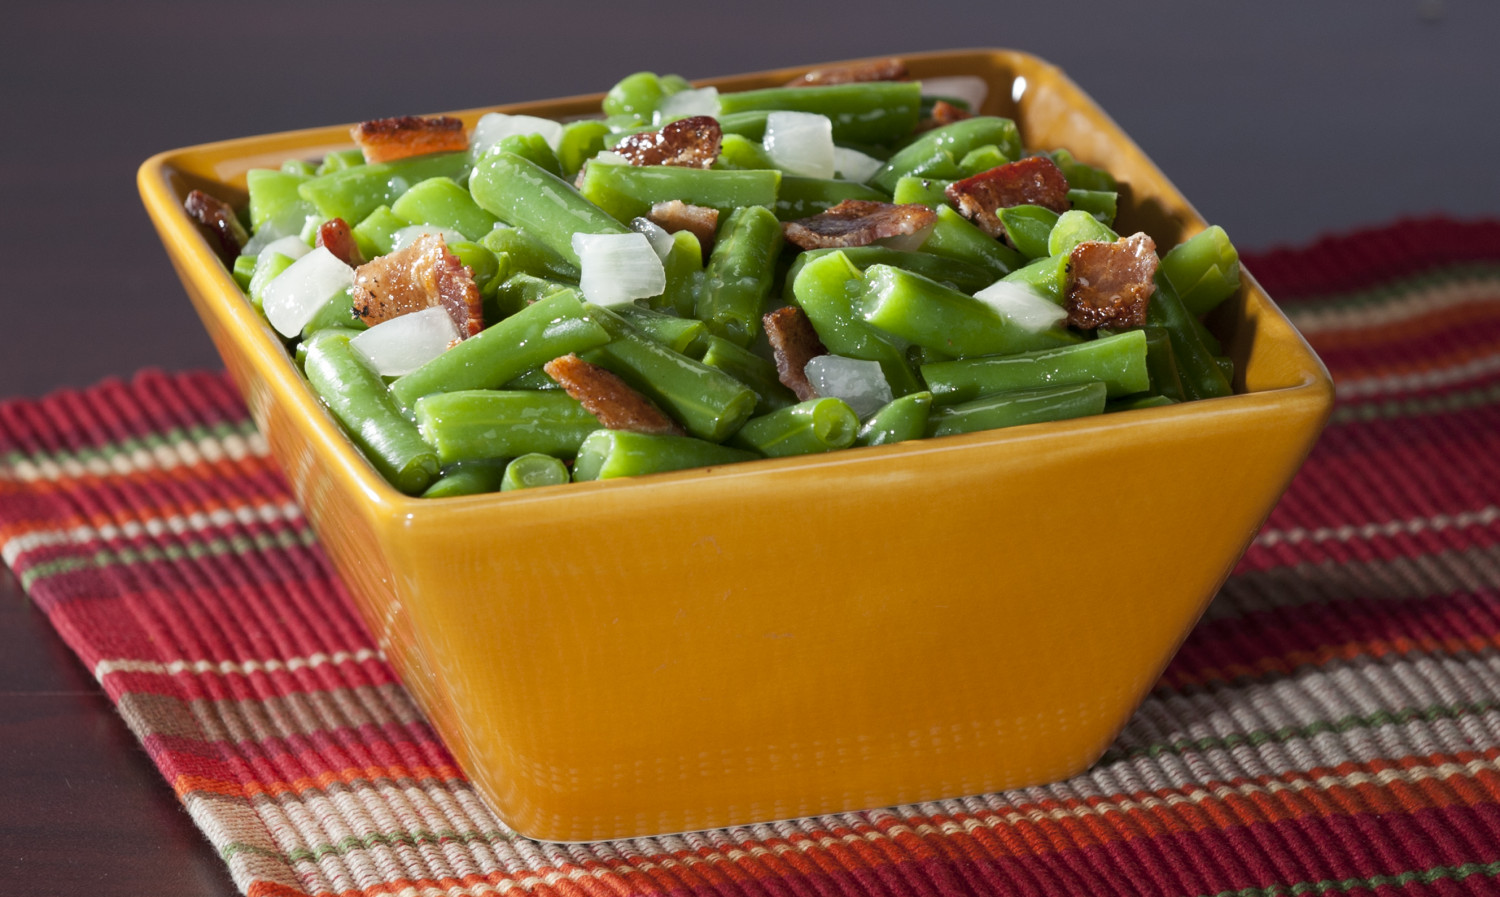 French Cut Green Beans - Simple Harvest - Vegetables - Pictsweet Farms